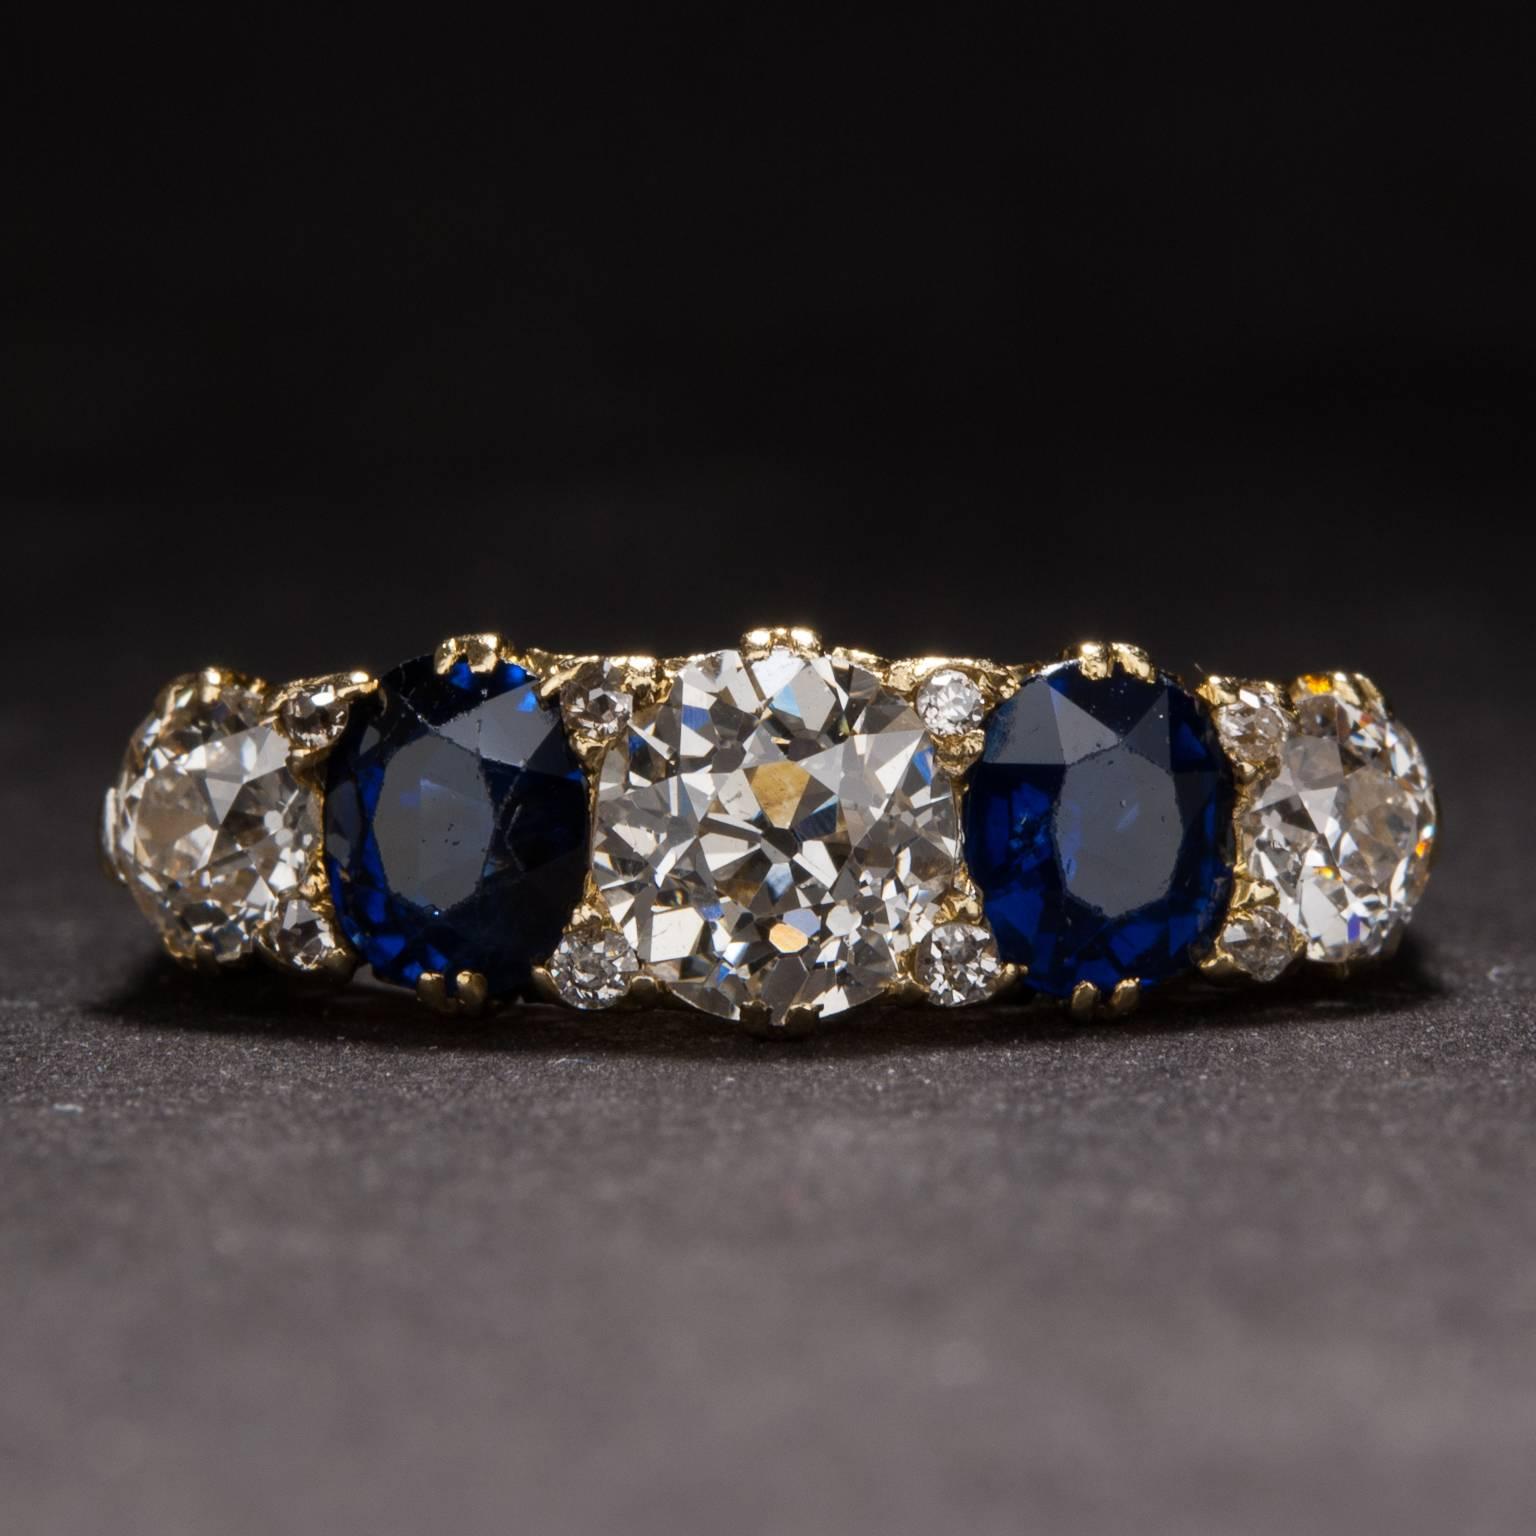 This lovely ring features a .75 carat center diamond, 2 sapphires weighing .40 carats each, and 2 additional side diamonds weighing a combined total of .60 carats. The ring is crafted in 18k yellow gold and is dated circa 1900.